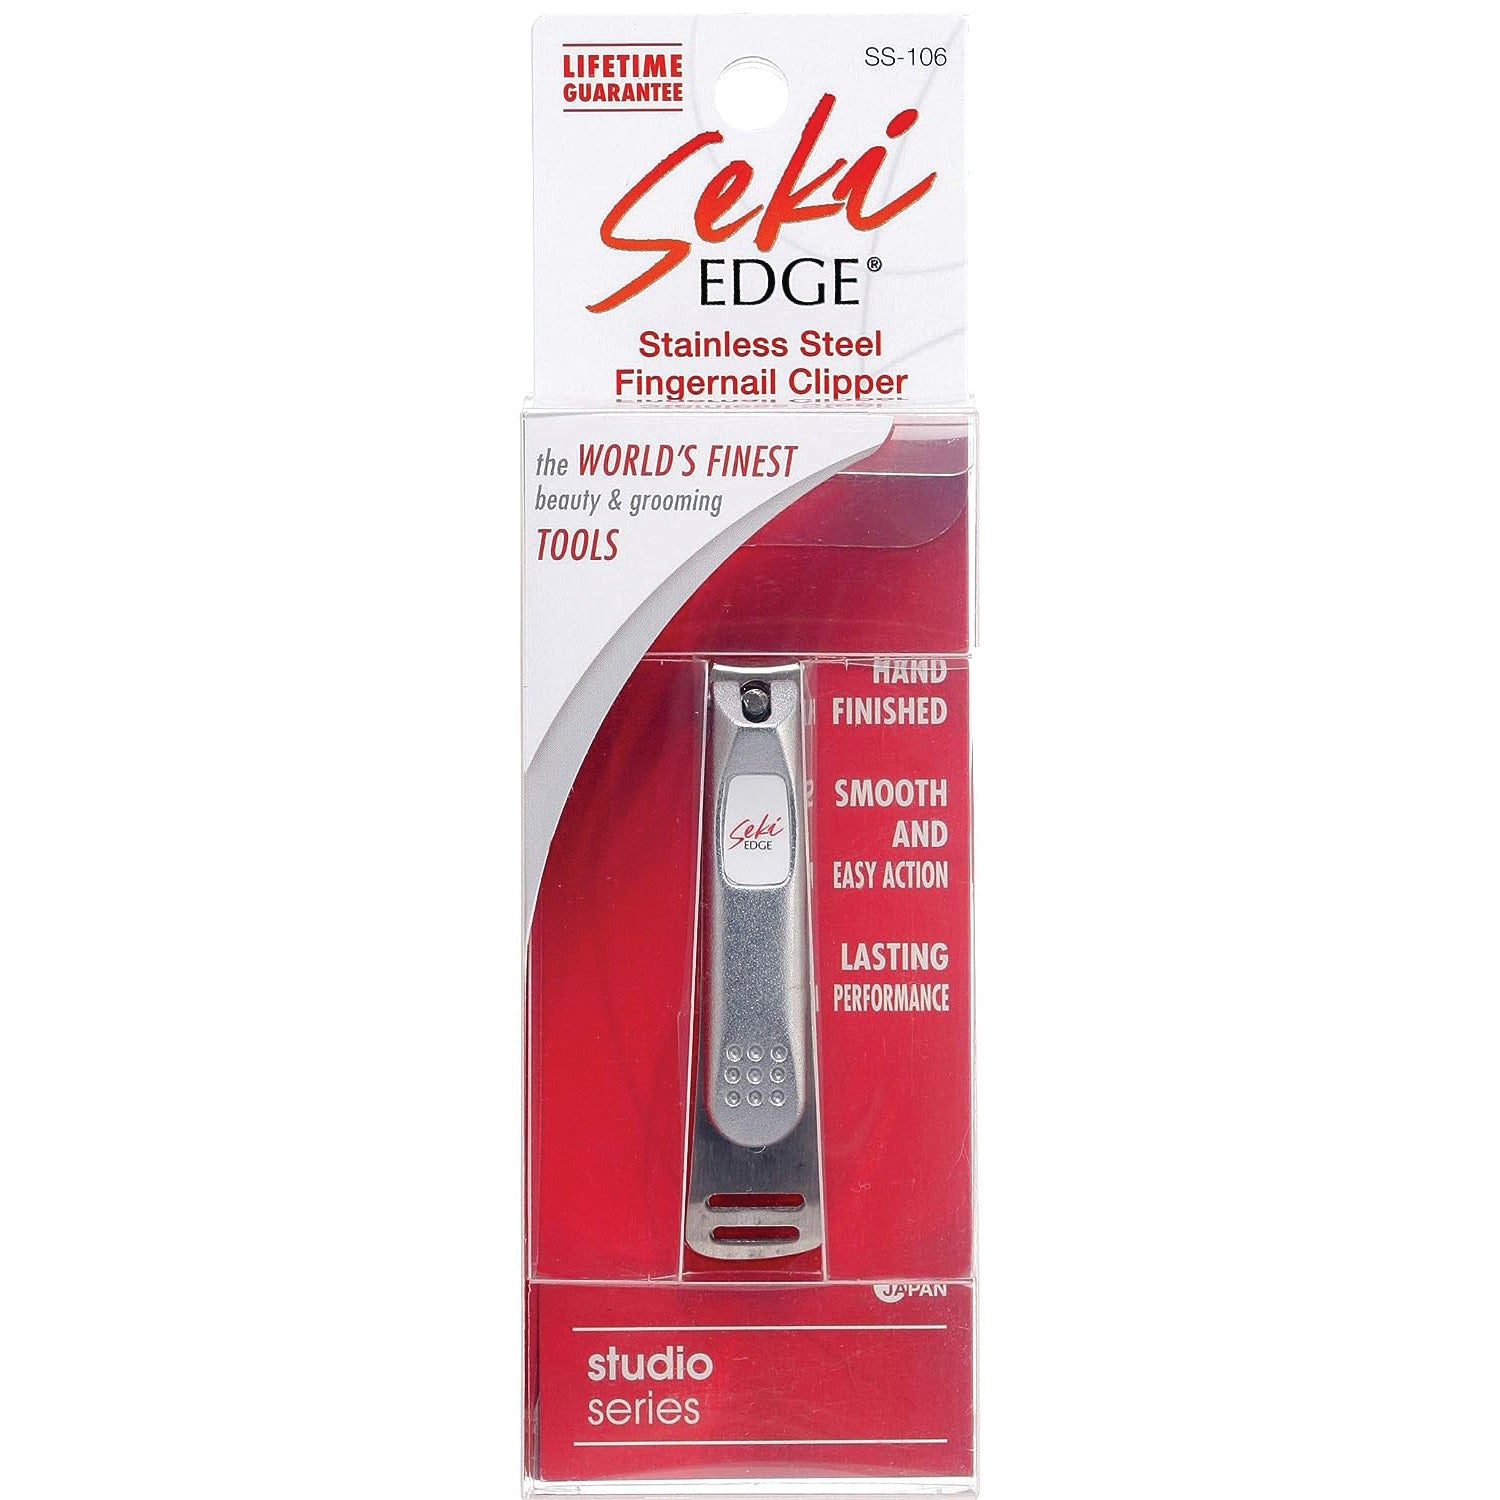 Seki edge nail clippers worlds finest beauty & grooming tools.